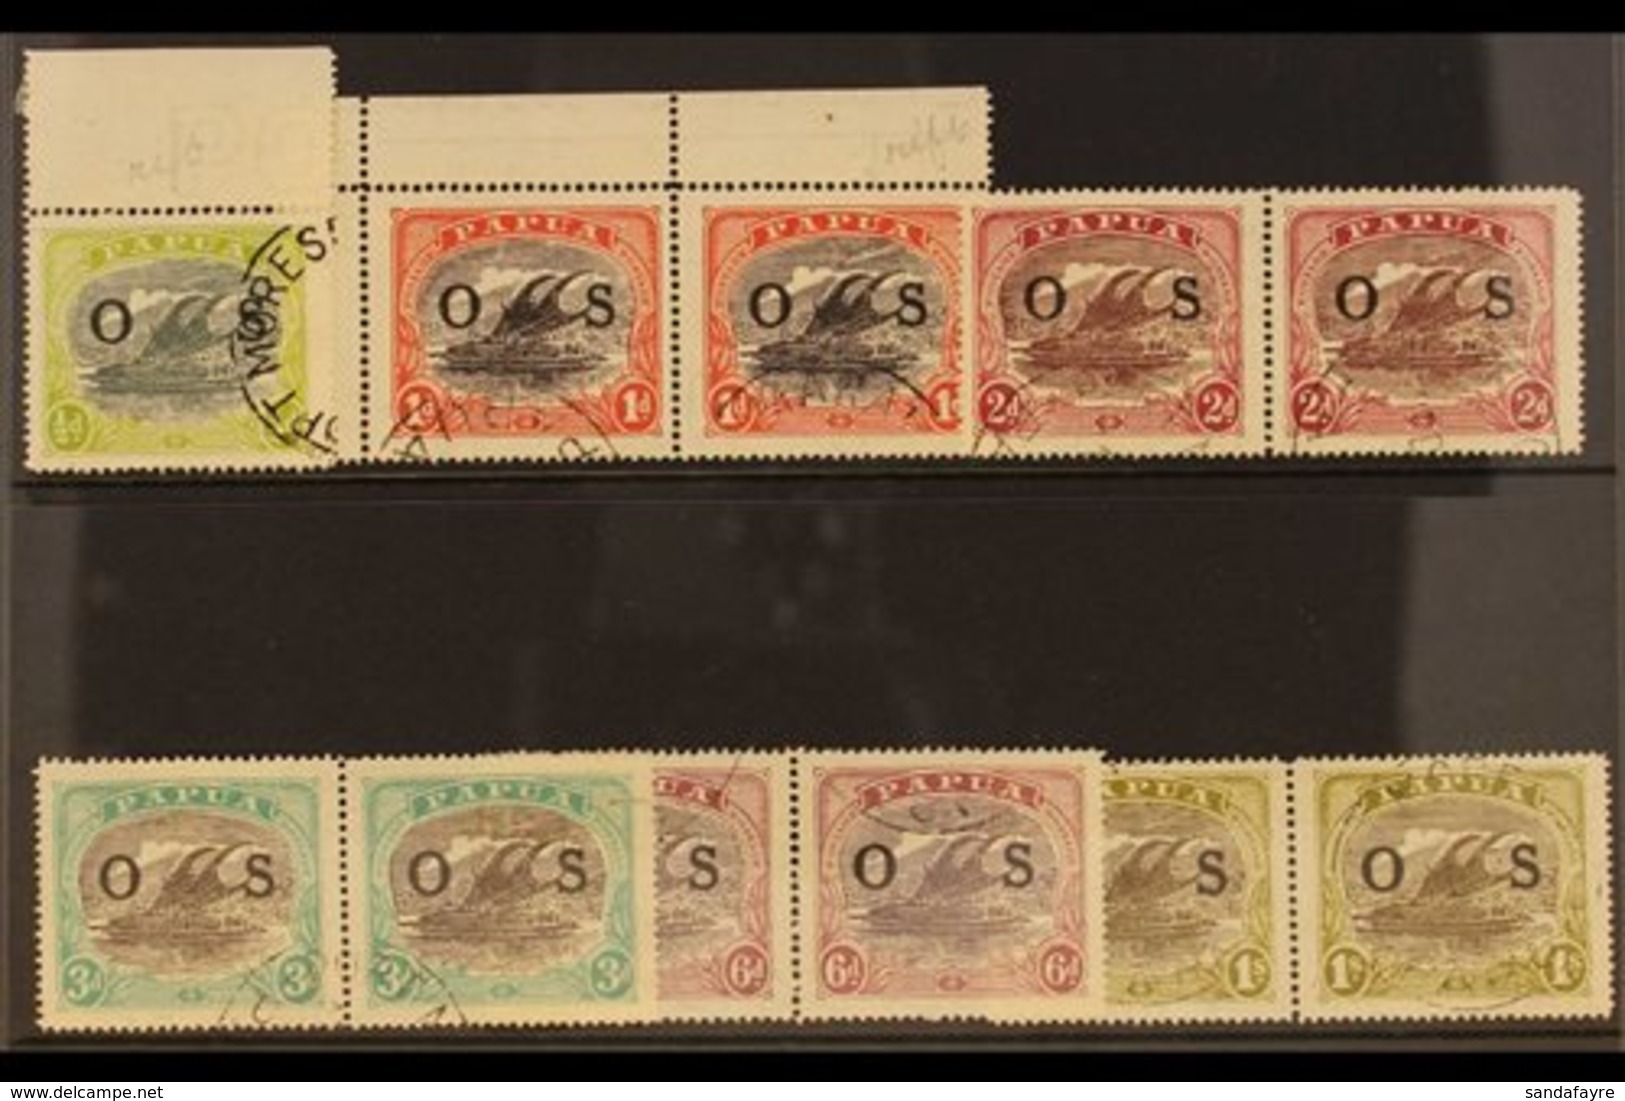 OFFICIALS WITH "RIFT IN CLOUD" FLAW 1931-32. VARIETIES. An "O S" Overprinted Fine Used Range Bearing "RIFT IN CLOUD"  Va - Papua New Guinea